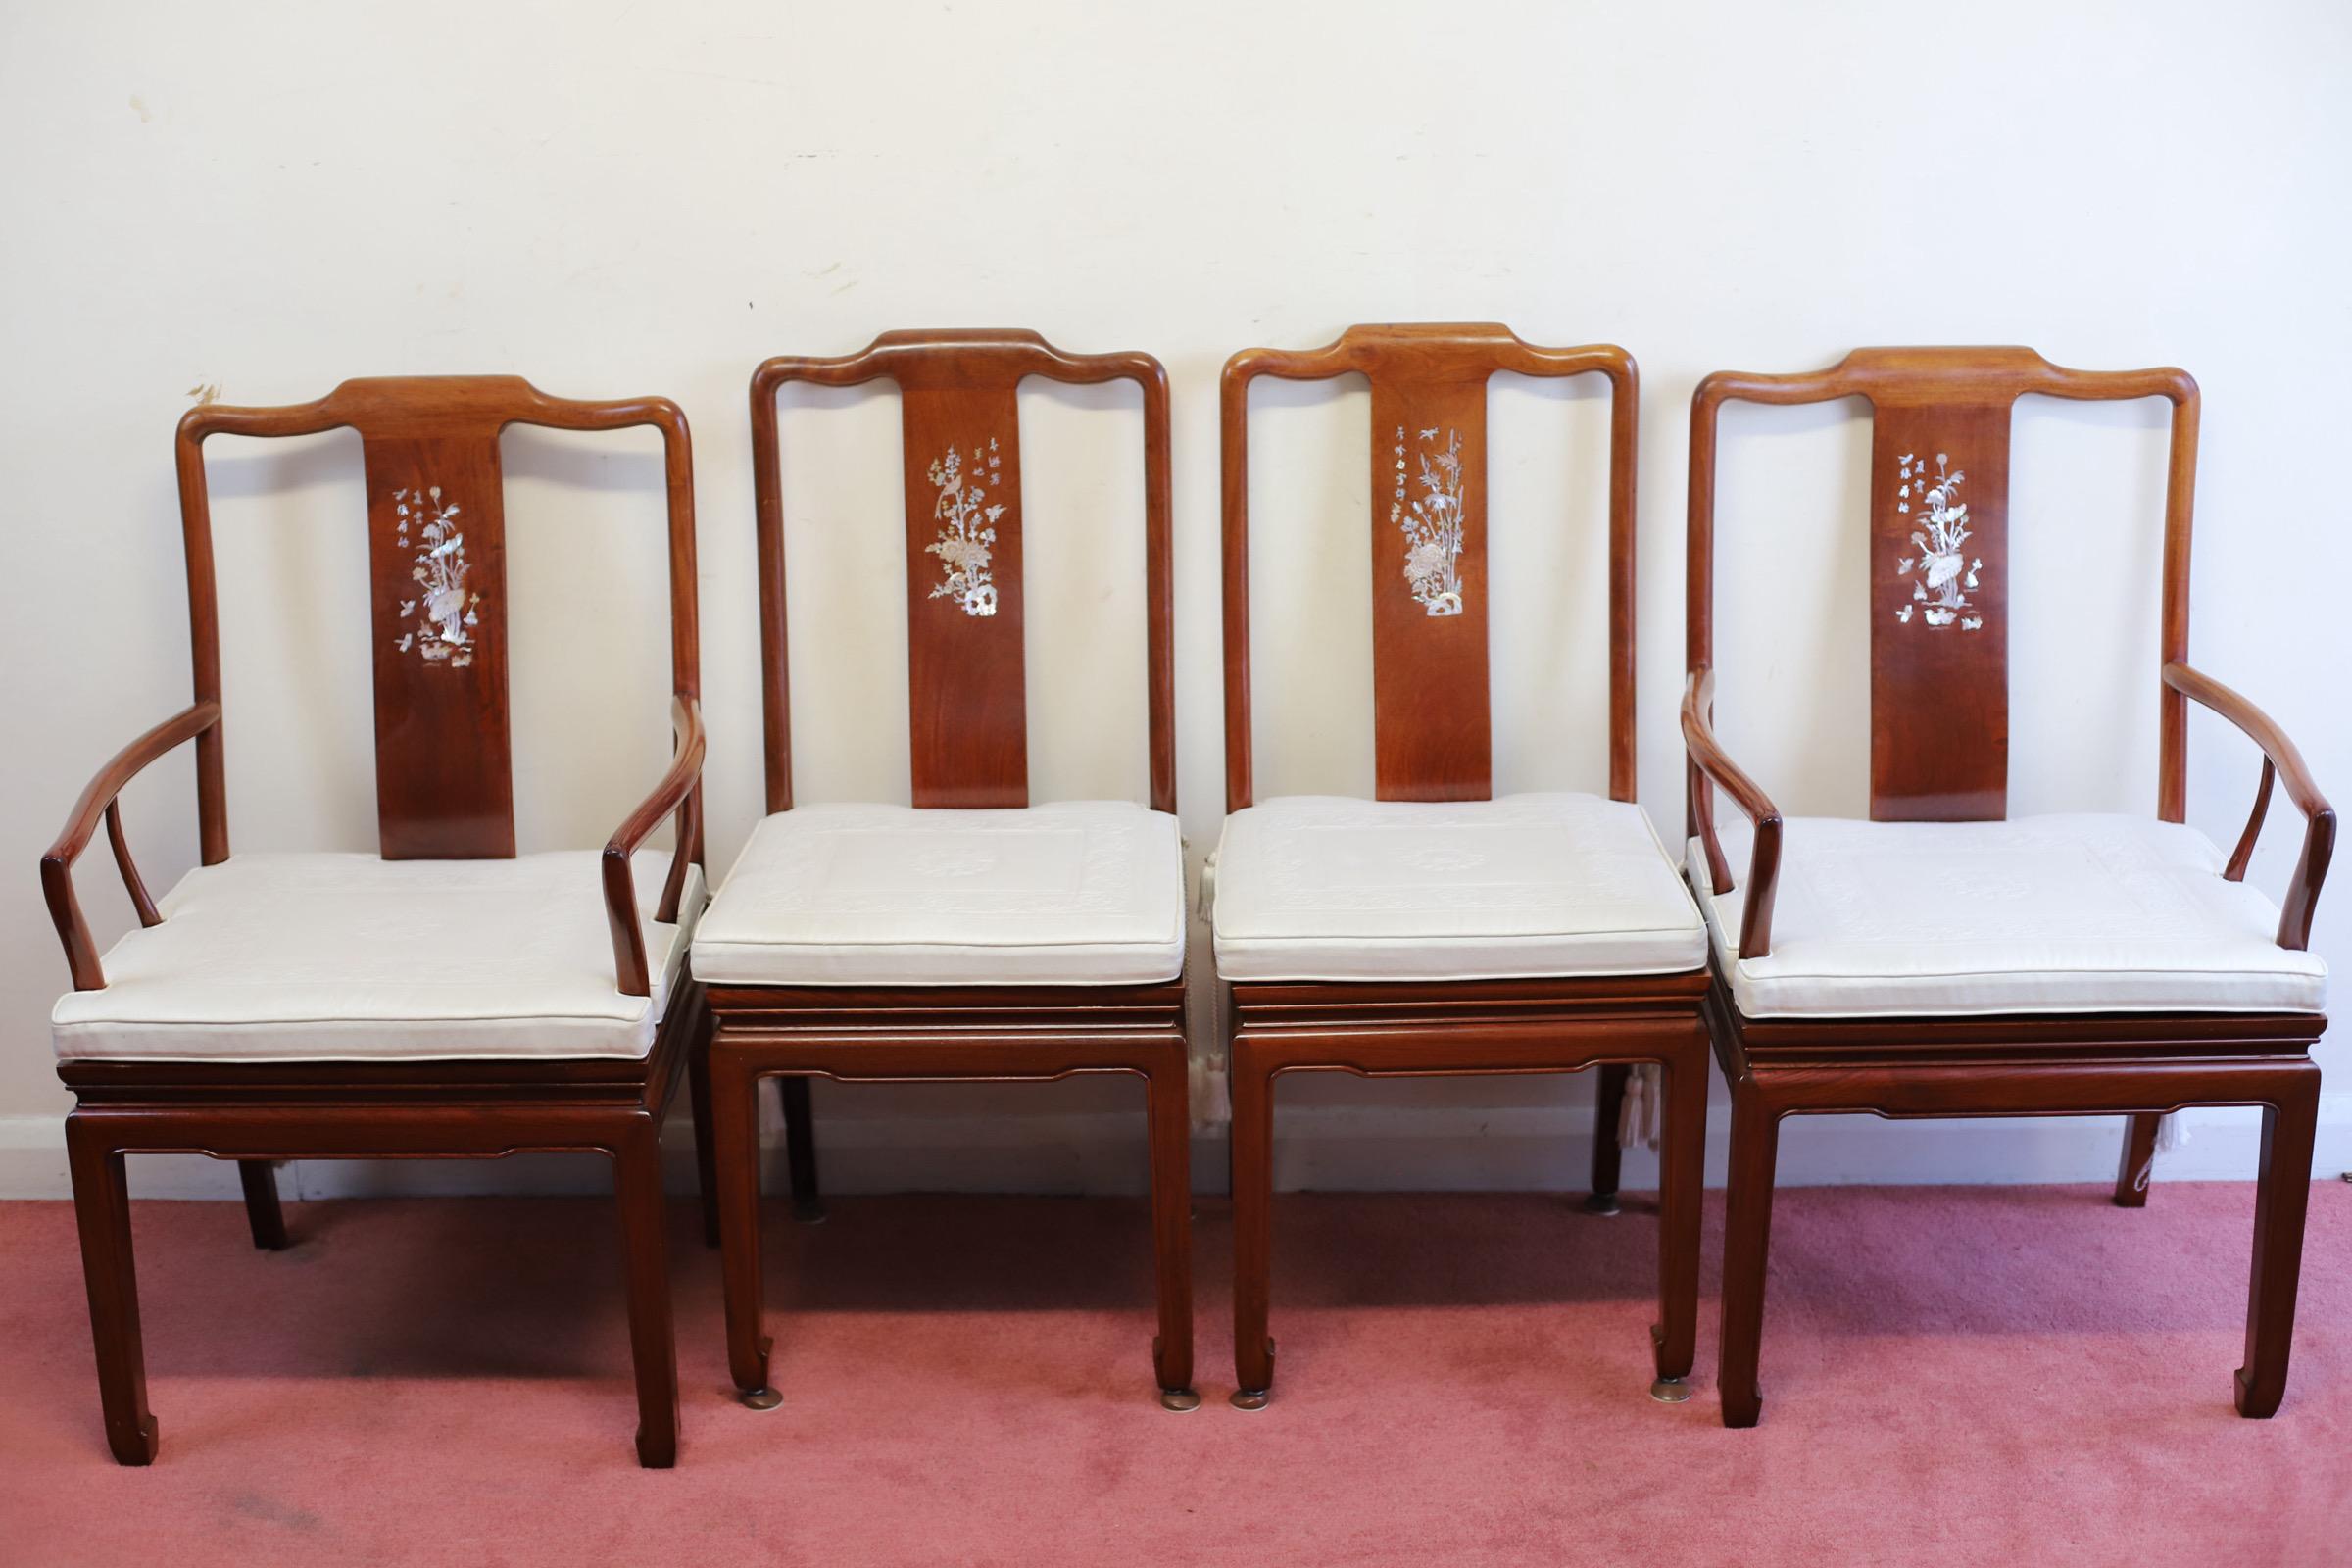 Mother-of-Pearl Stunning Asian Hardwood And Mother-of-pearl Inset Dining Table And Eight Chairs For Sale